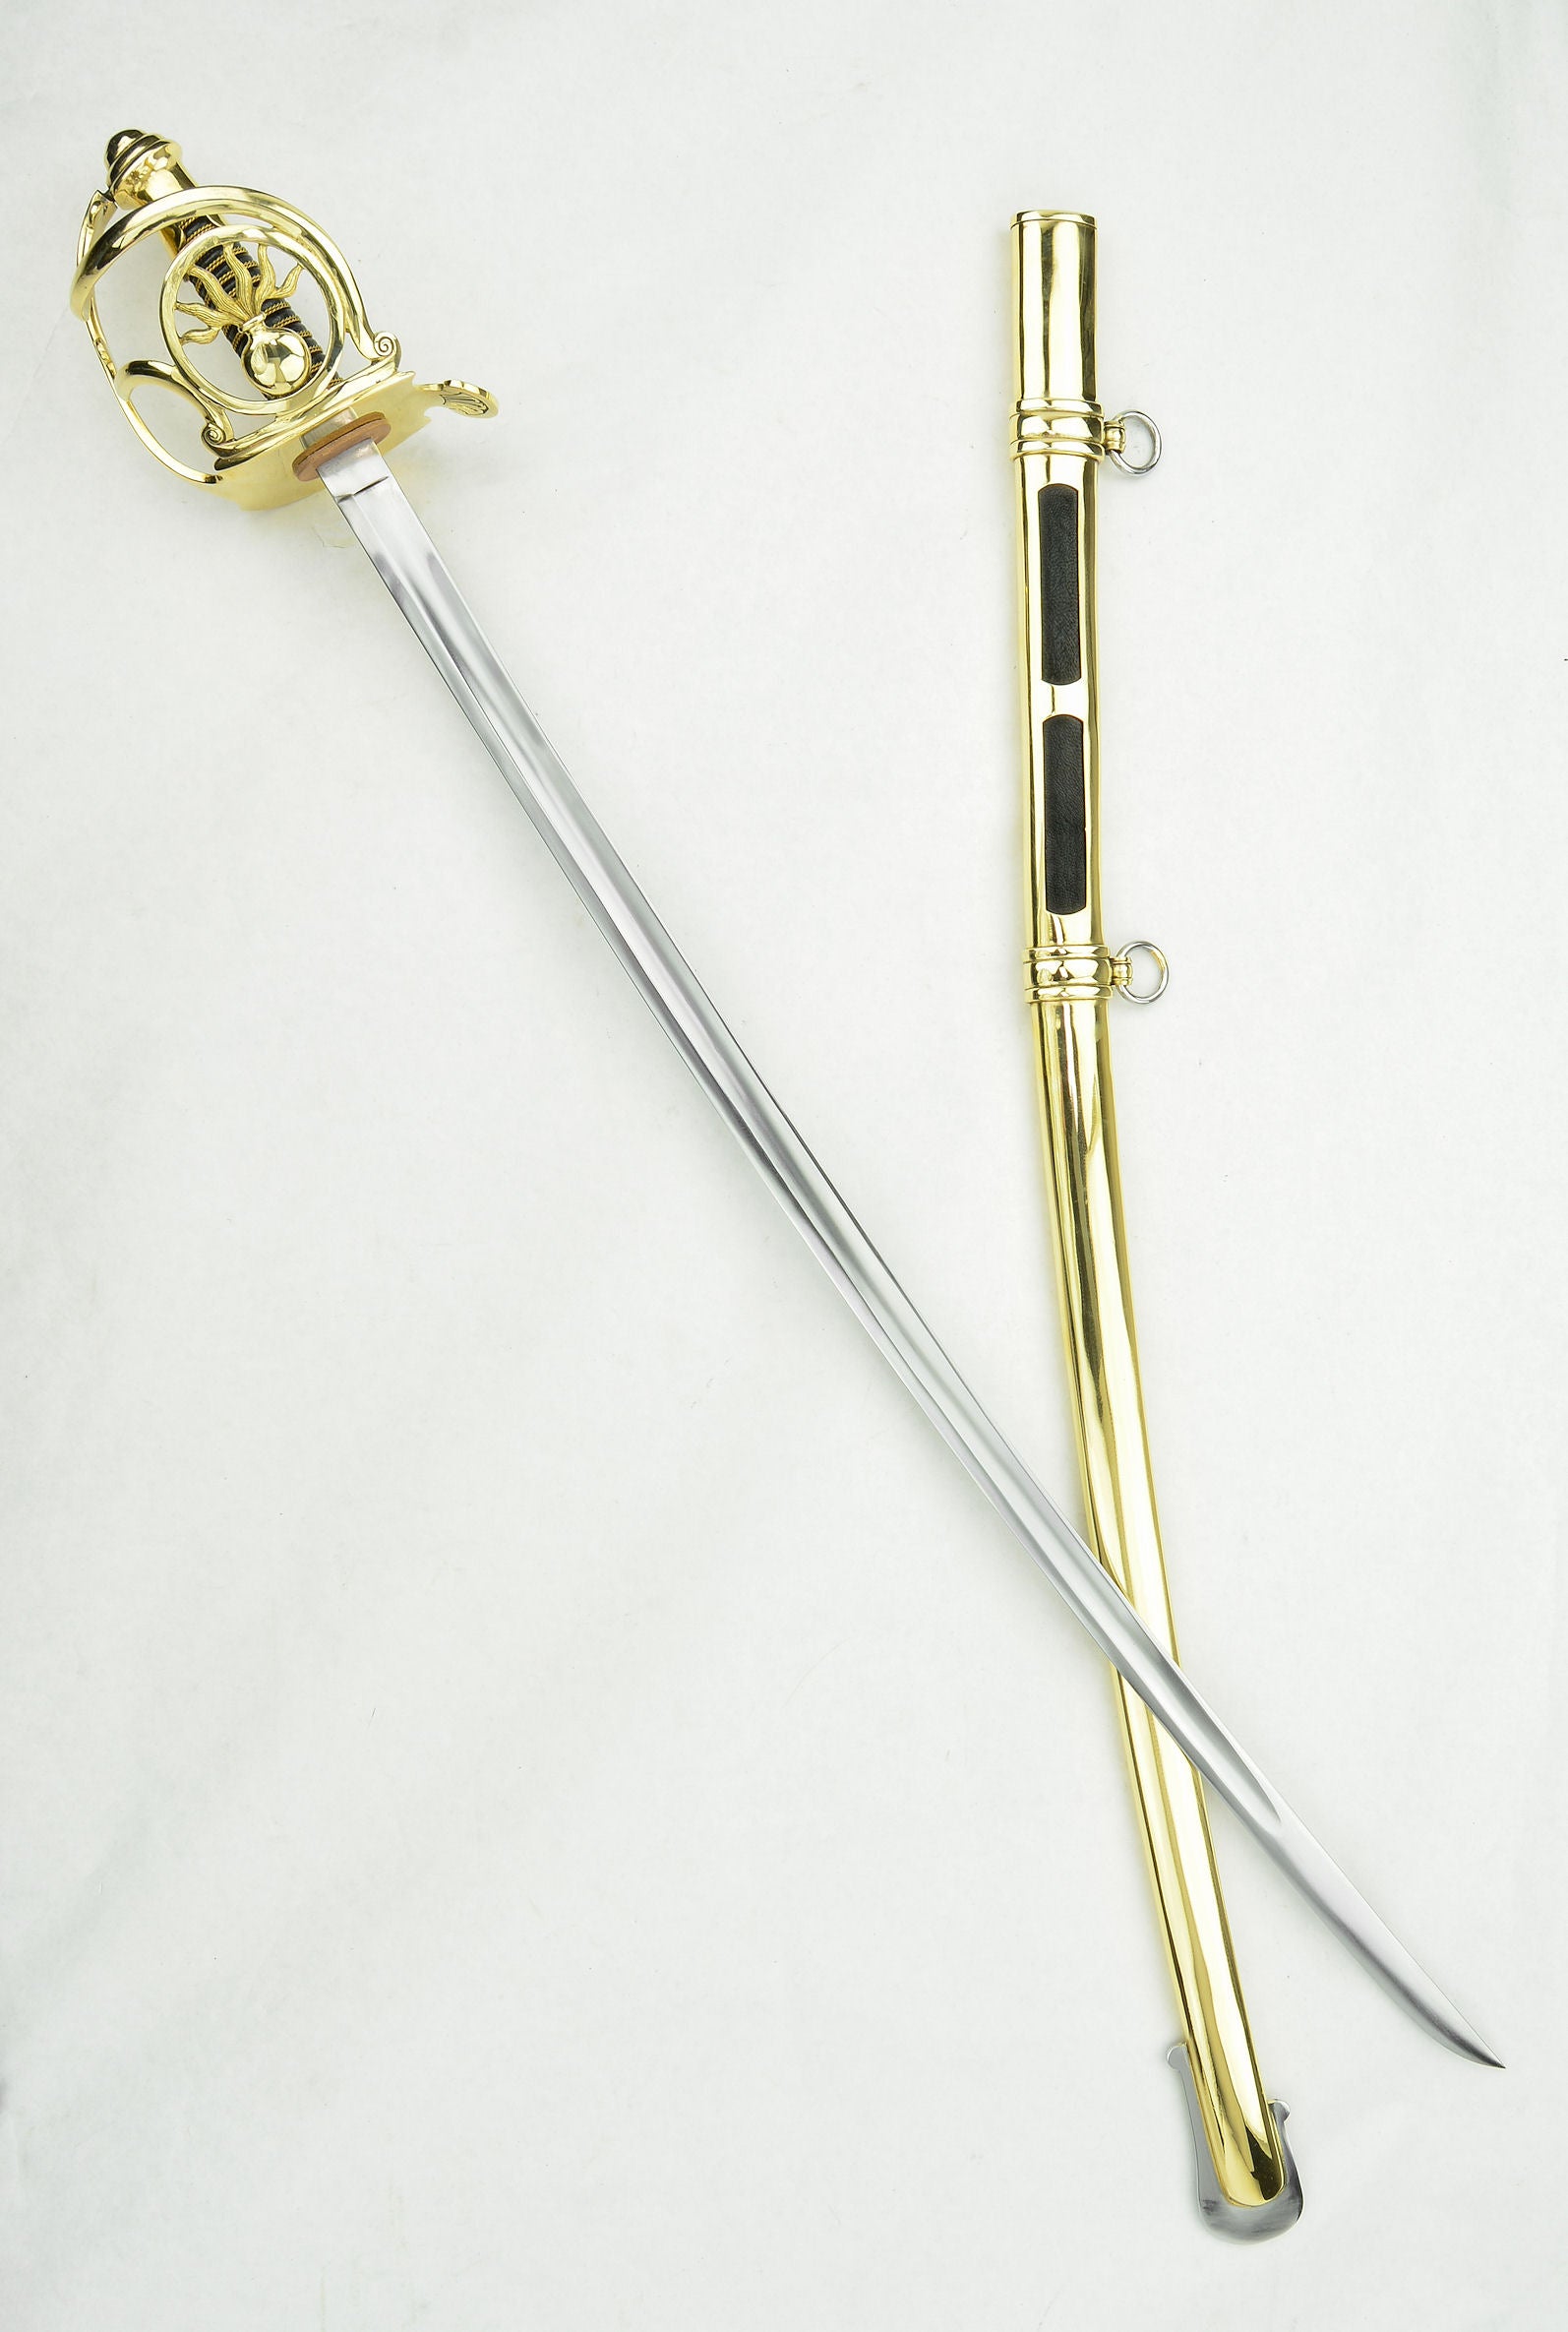 Napoleonic Horse Grenadiers of the Imperial Guard Sword